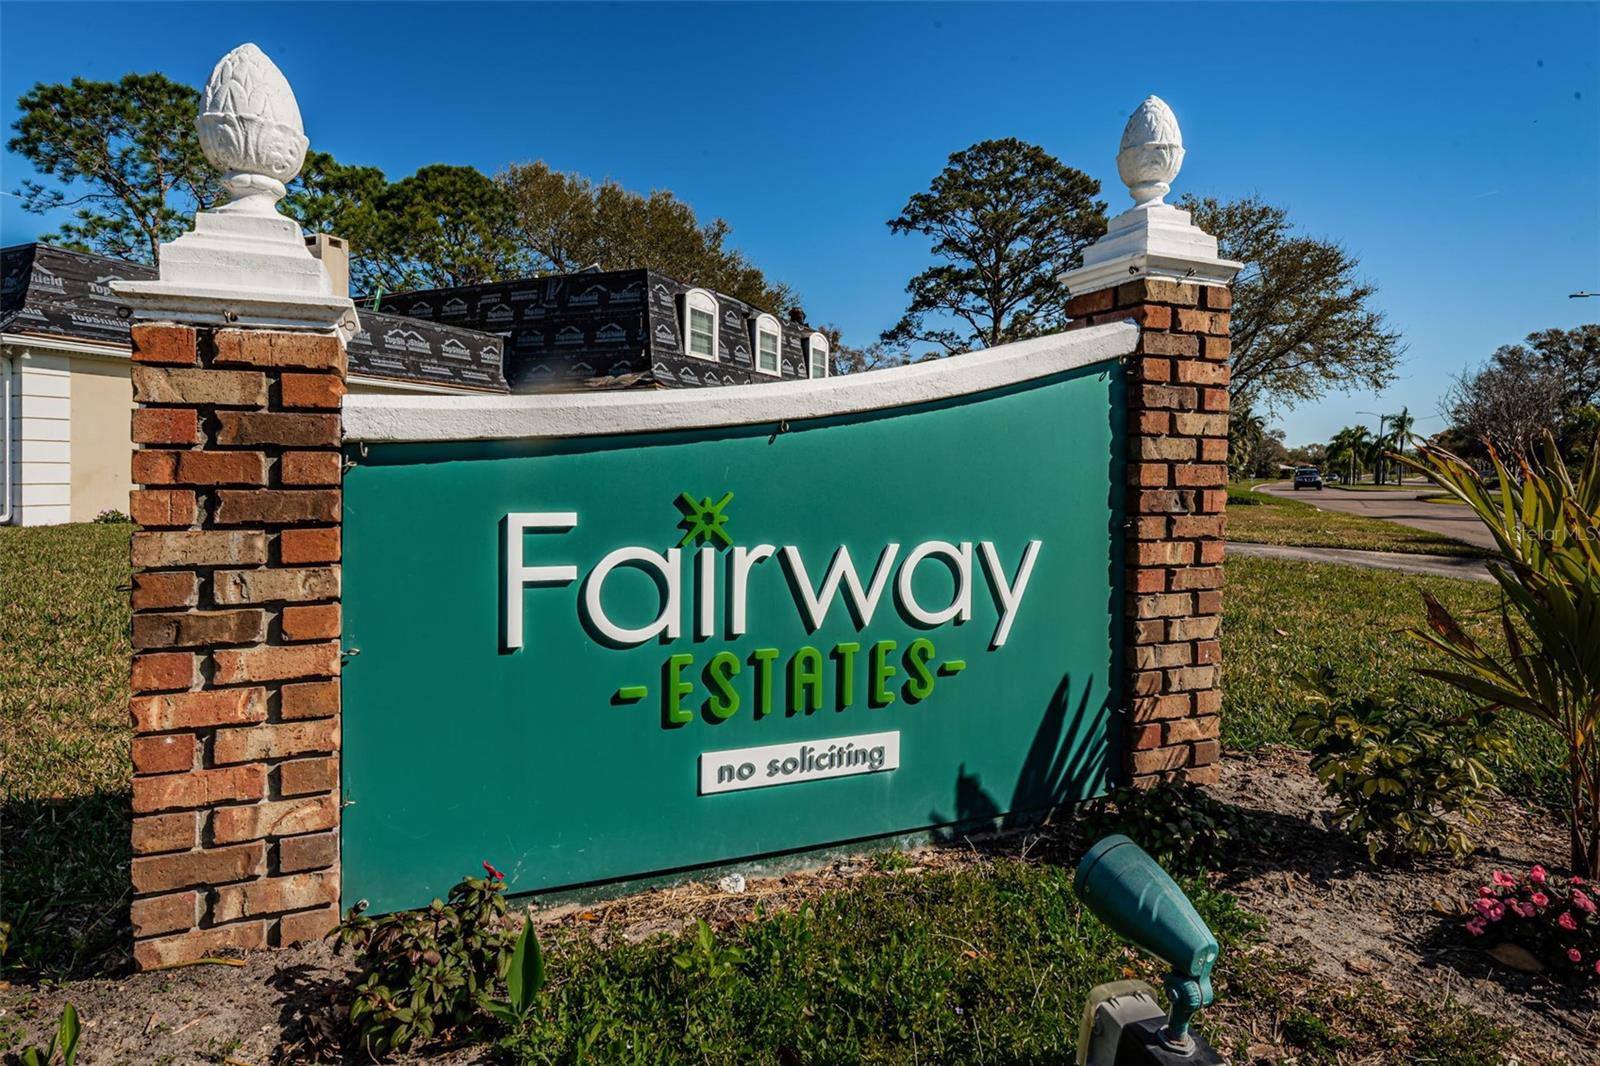 Fairway Estates is built on the Dunedin Golf Club 18 hole championship course. Voluntary HOA has an active social calendar and no deed restrictions.